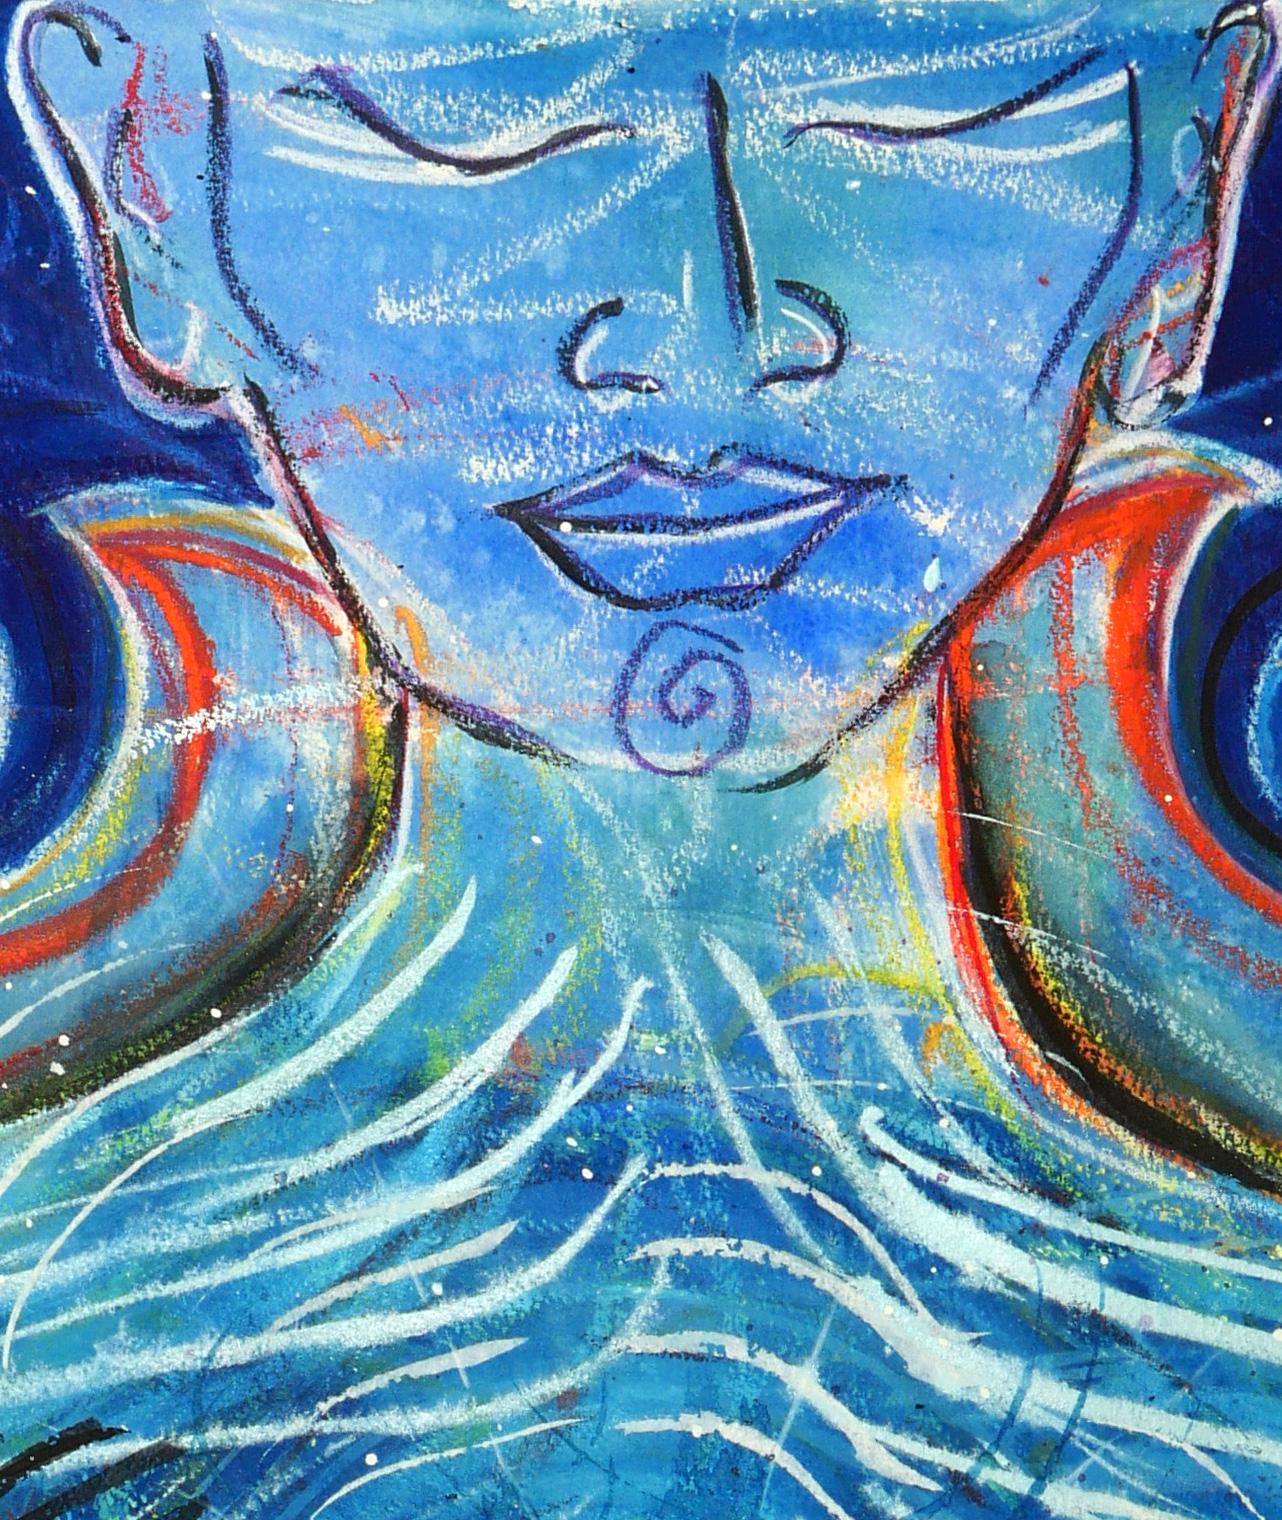 Open Heart, Vibrant blues, Eastern spiritual, figure - Painting by Janet Morgan